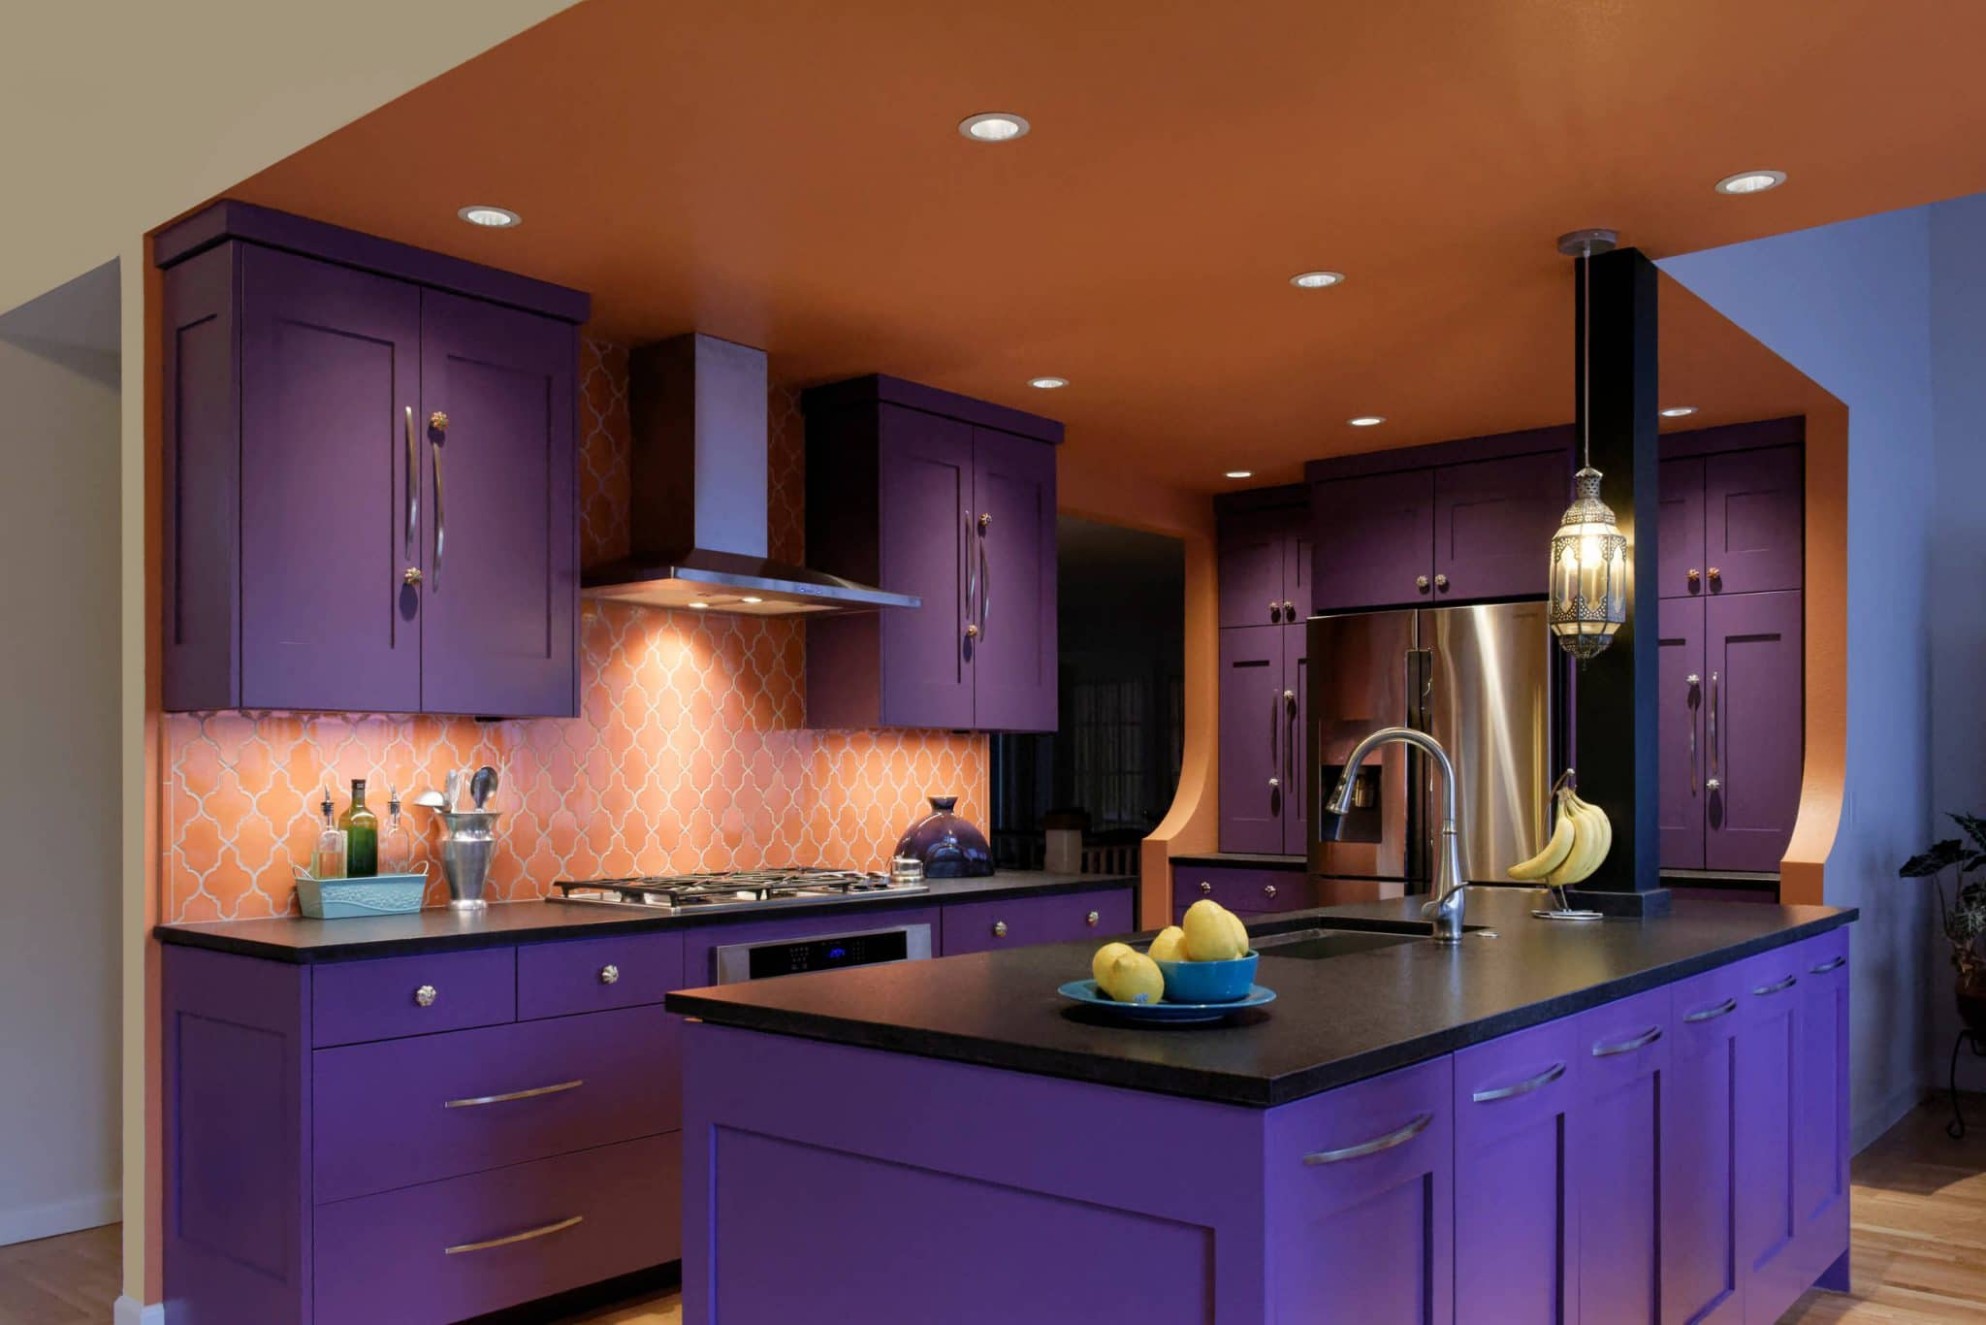 Best Colors to Use for Kitchen Cabinets - what is the most popular color for kitchen cabinets 2018?